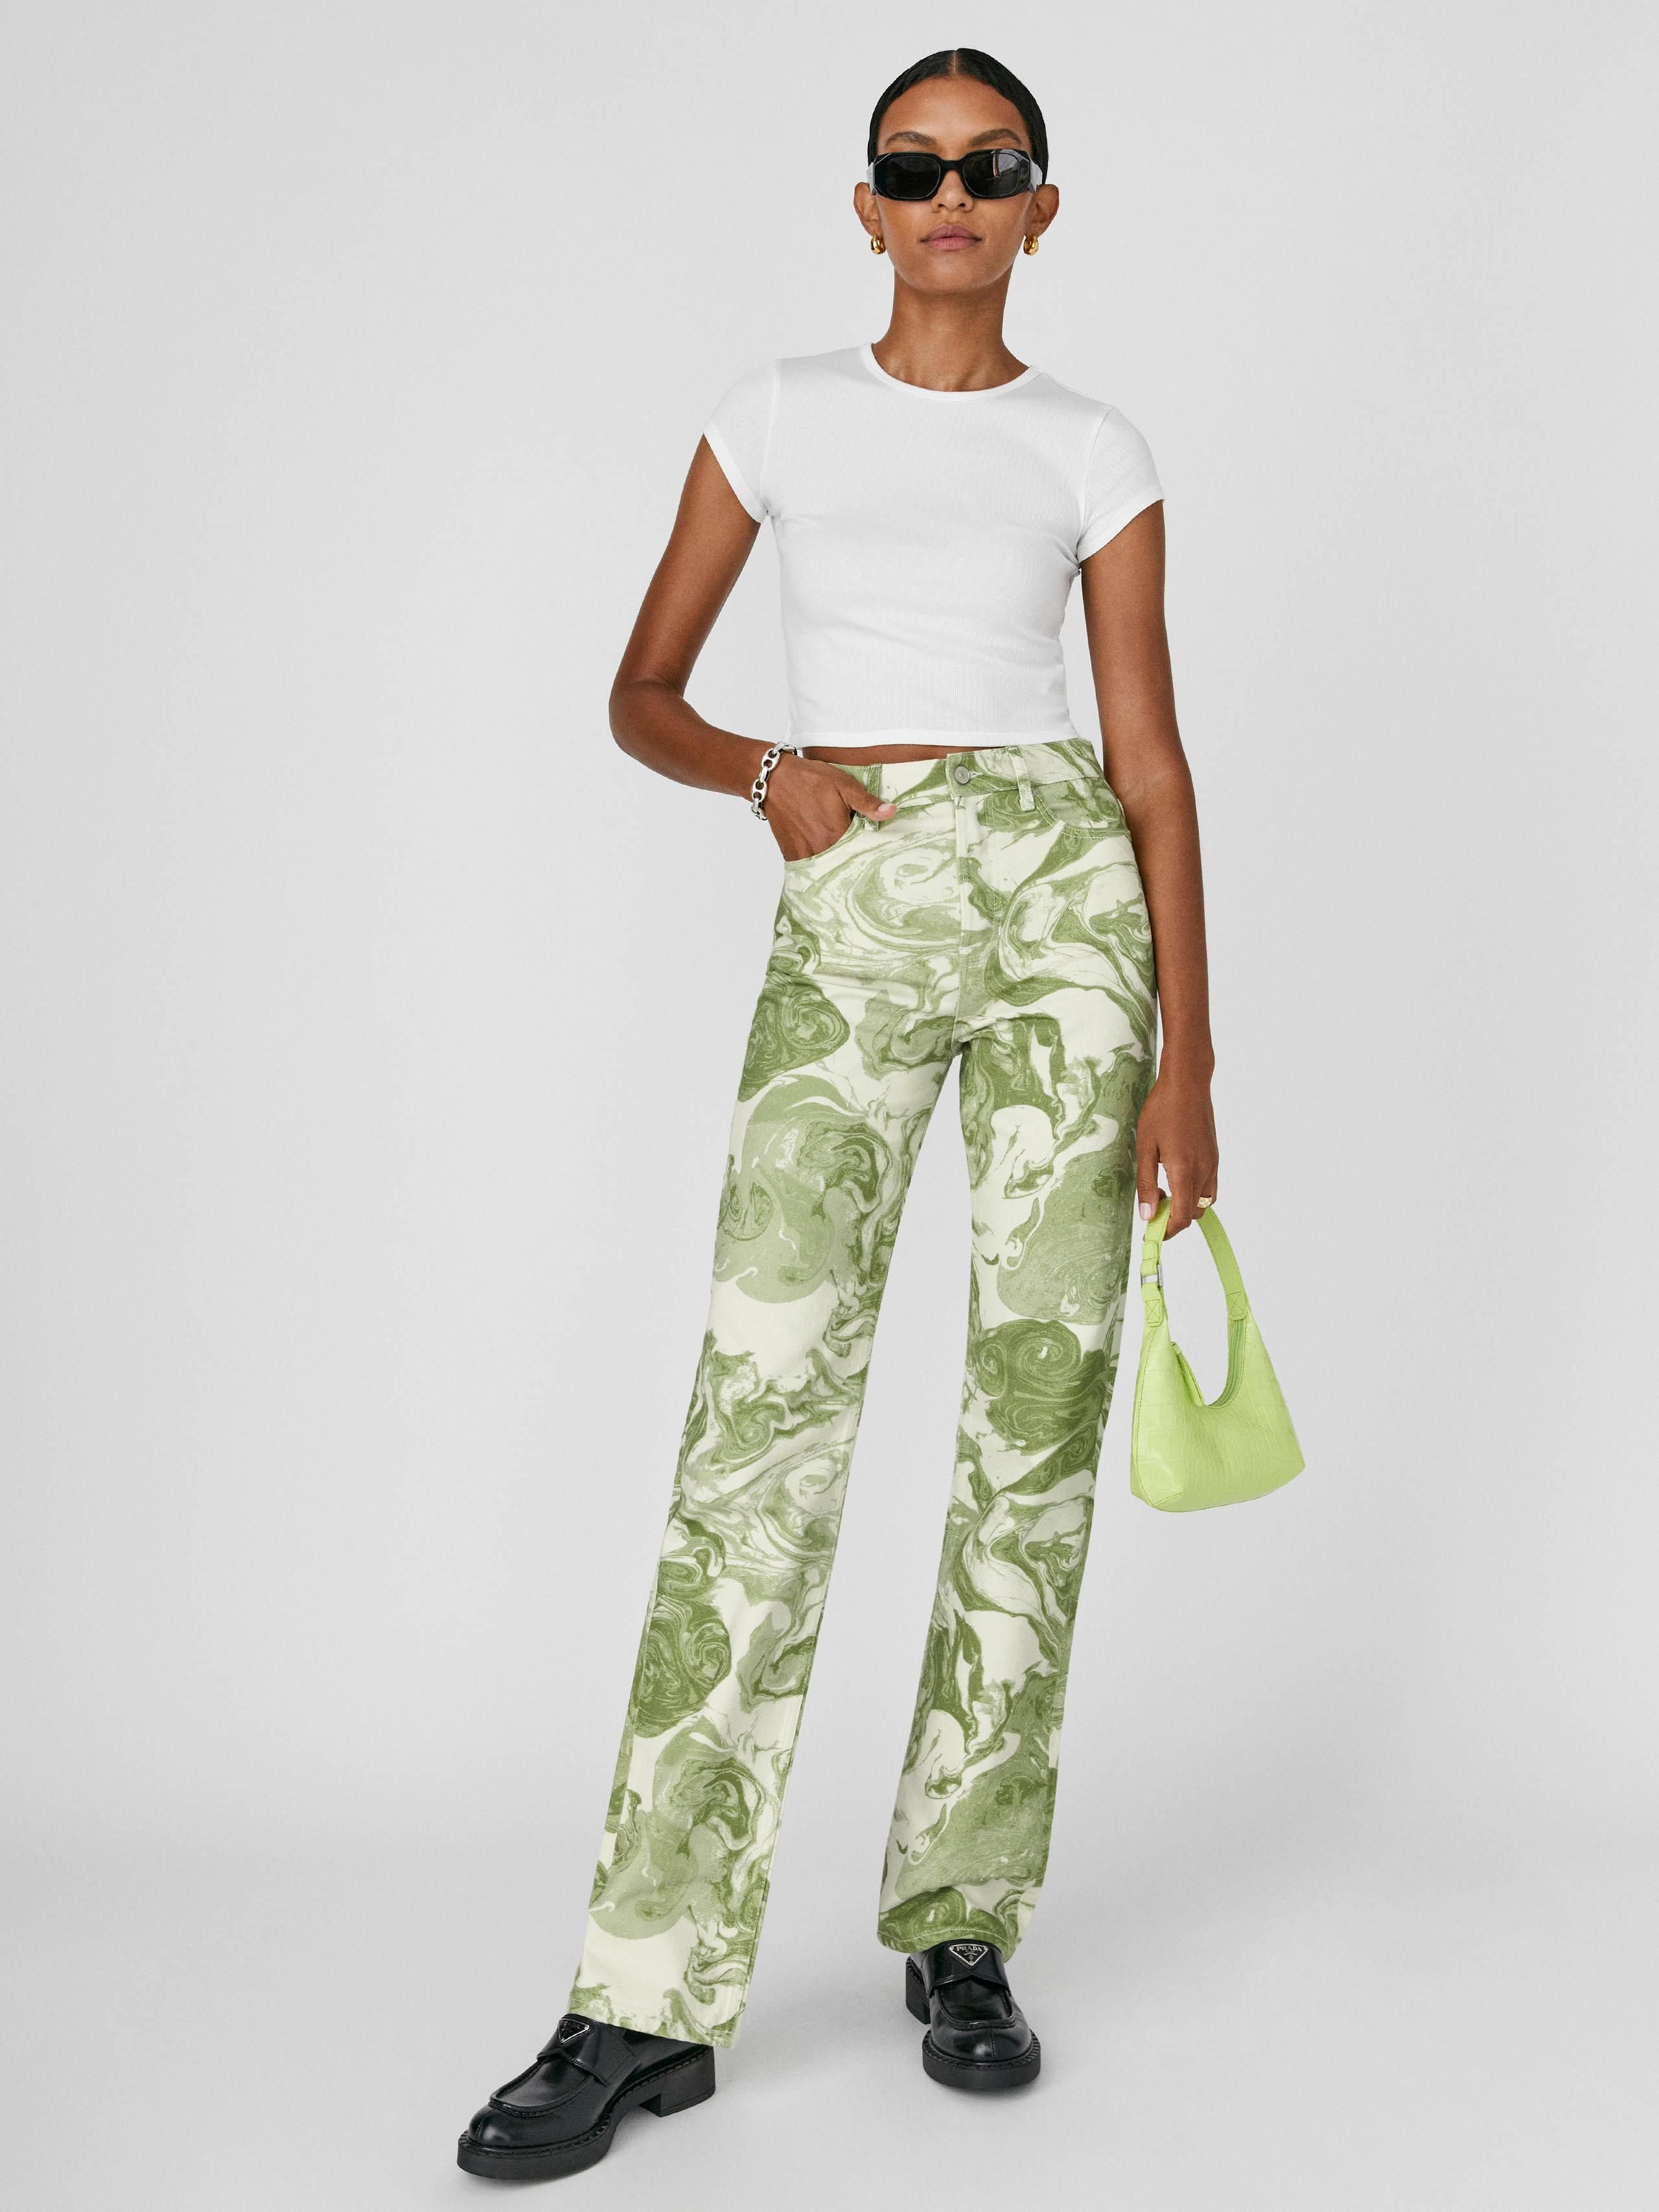 Printed Pants Fall Fashion Trend  For Your Wardrobe  Brit  Co